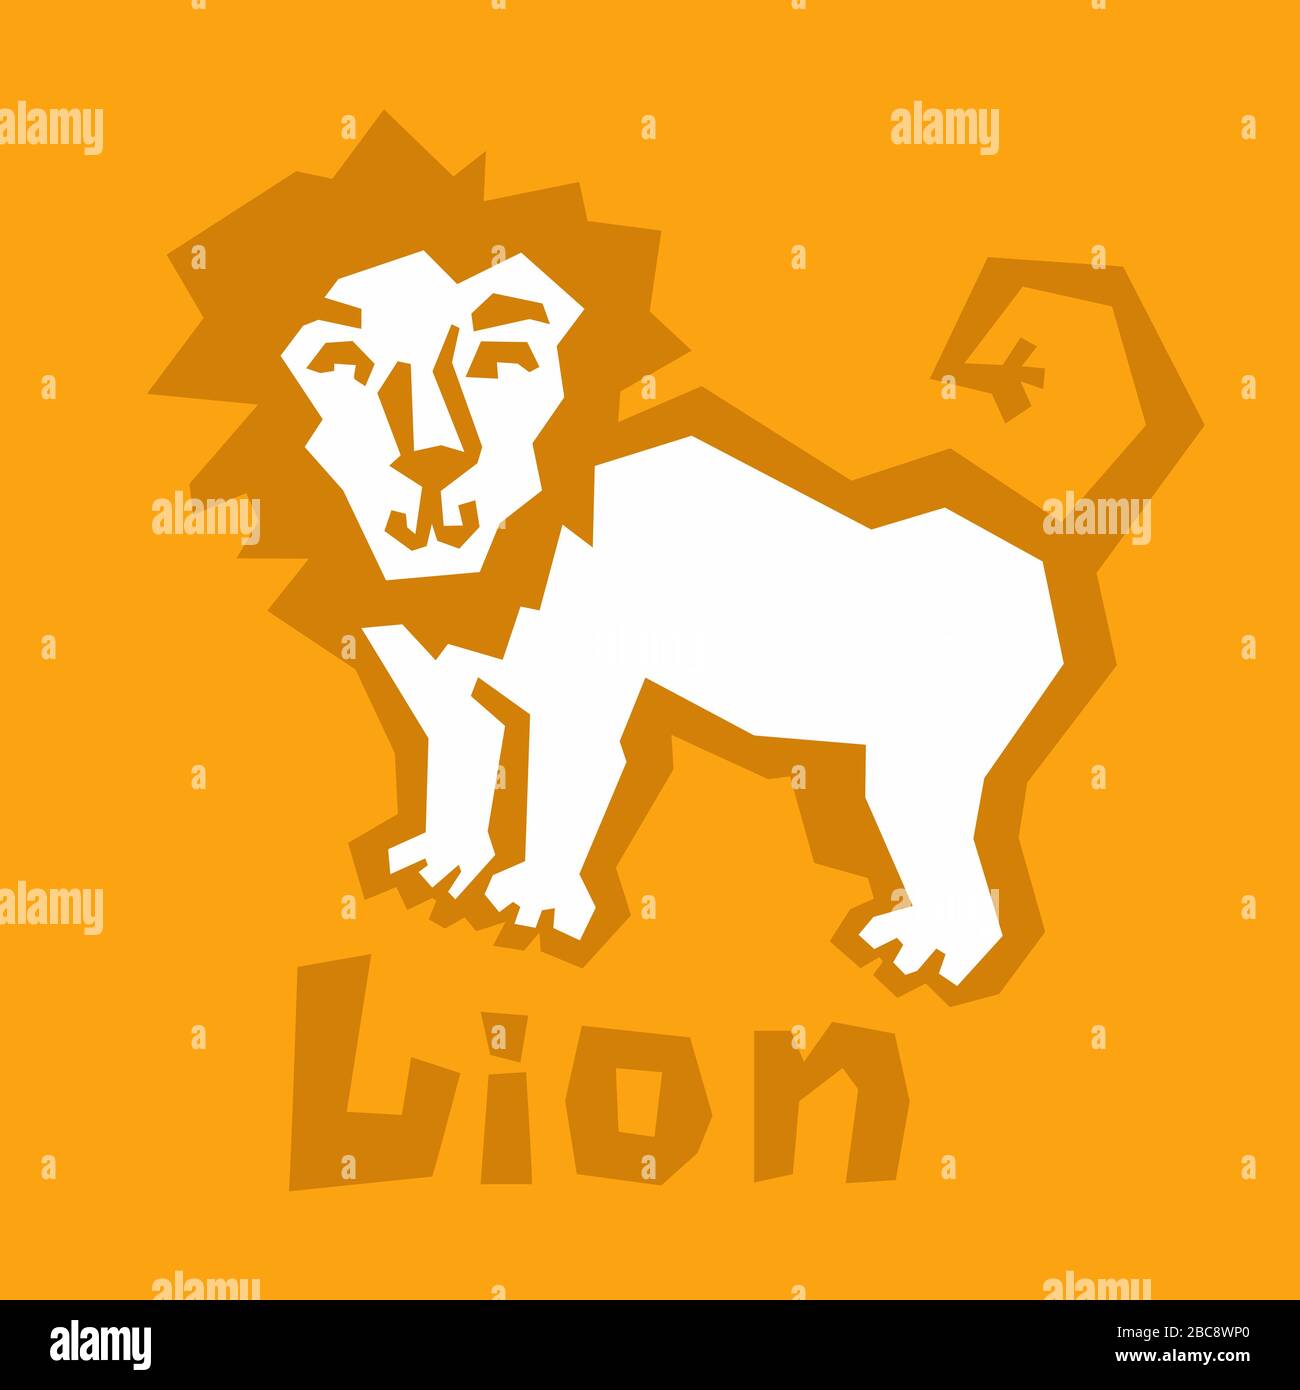 Lion cartoon character. Flat simple icon, line art style. Outline symbol, stylized image of a wild animal lion, leo. Stroke vector logo. Thick linear Stock Vector